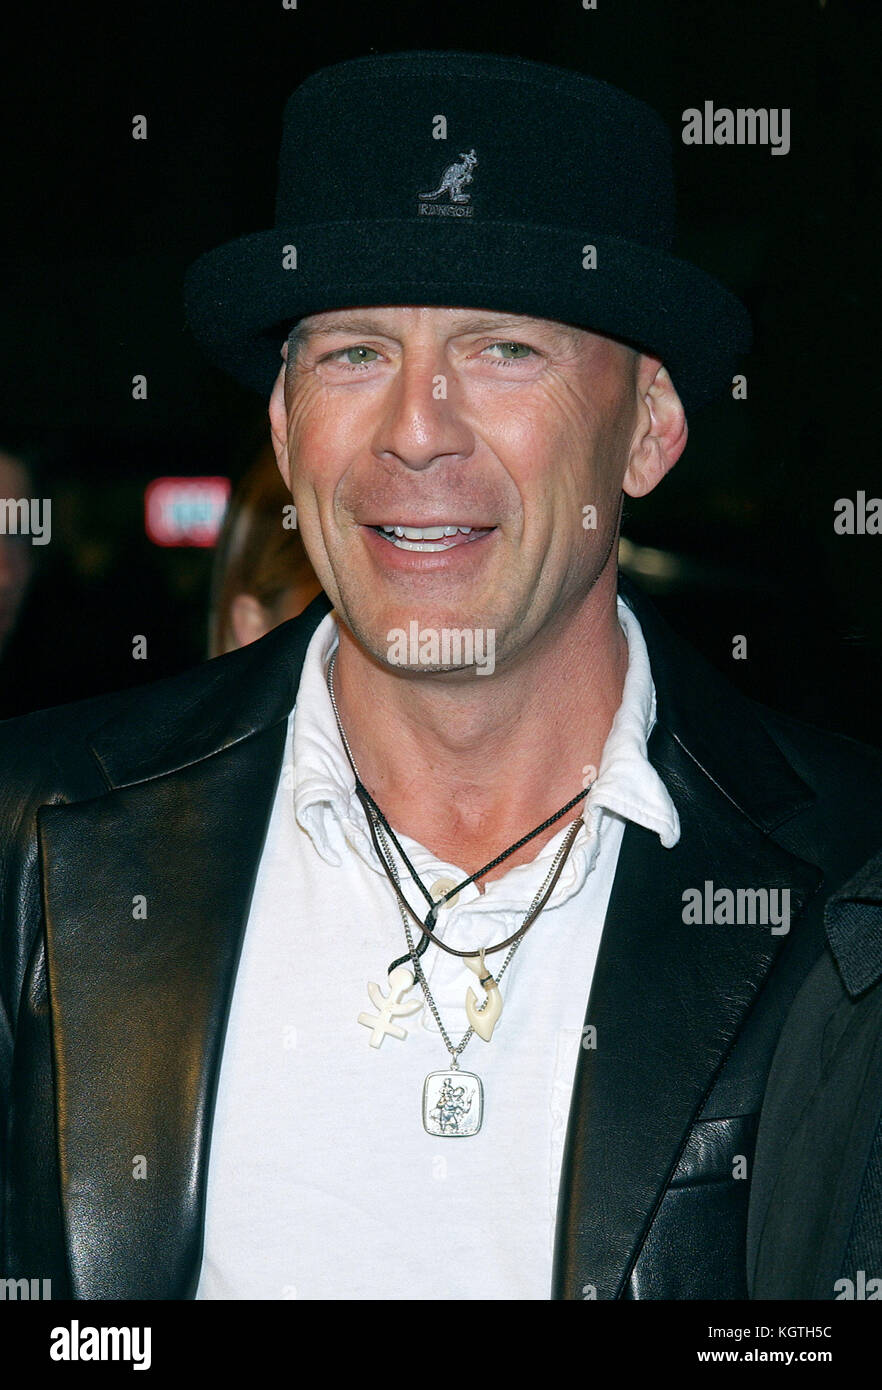 Bruce Willis arriving the  'Tears of The Sun Premiere' at the Westwood Village in Los angeles. March 3, 2003.Bruce Willis -  = People,  , Headshot, , Premiere, Awards show,  Arrival, Red Carpet Event, Vertical, Smiling, Film Industry,  USA, Movie actor, movie celebrity, Artist, Celebrity, Looking At Camera, Photography, Arts Culture and Entertainment,  Attending an event,  Bestof, One Person, Stock Photo